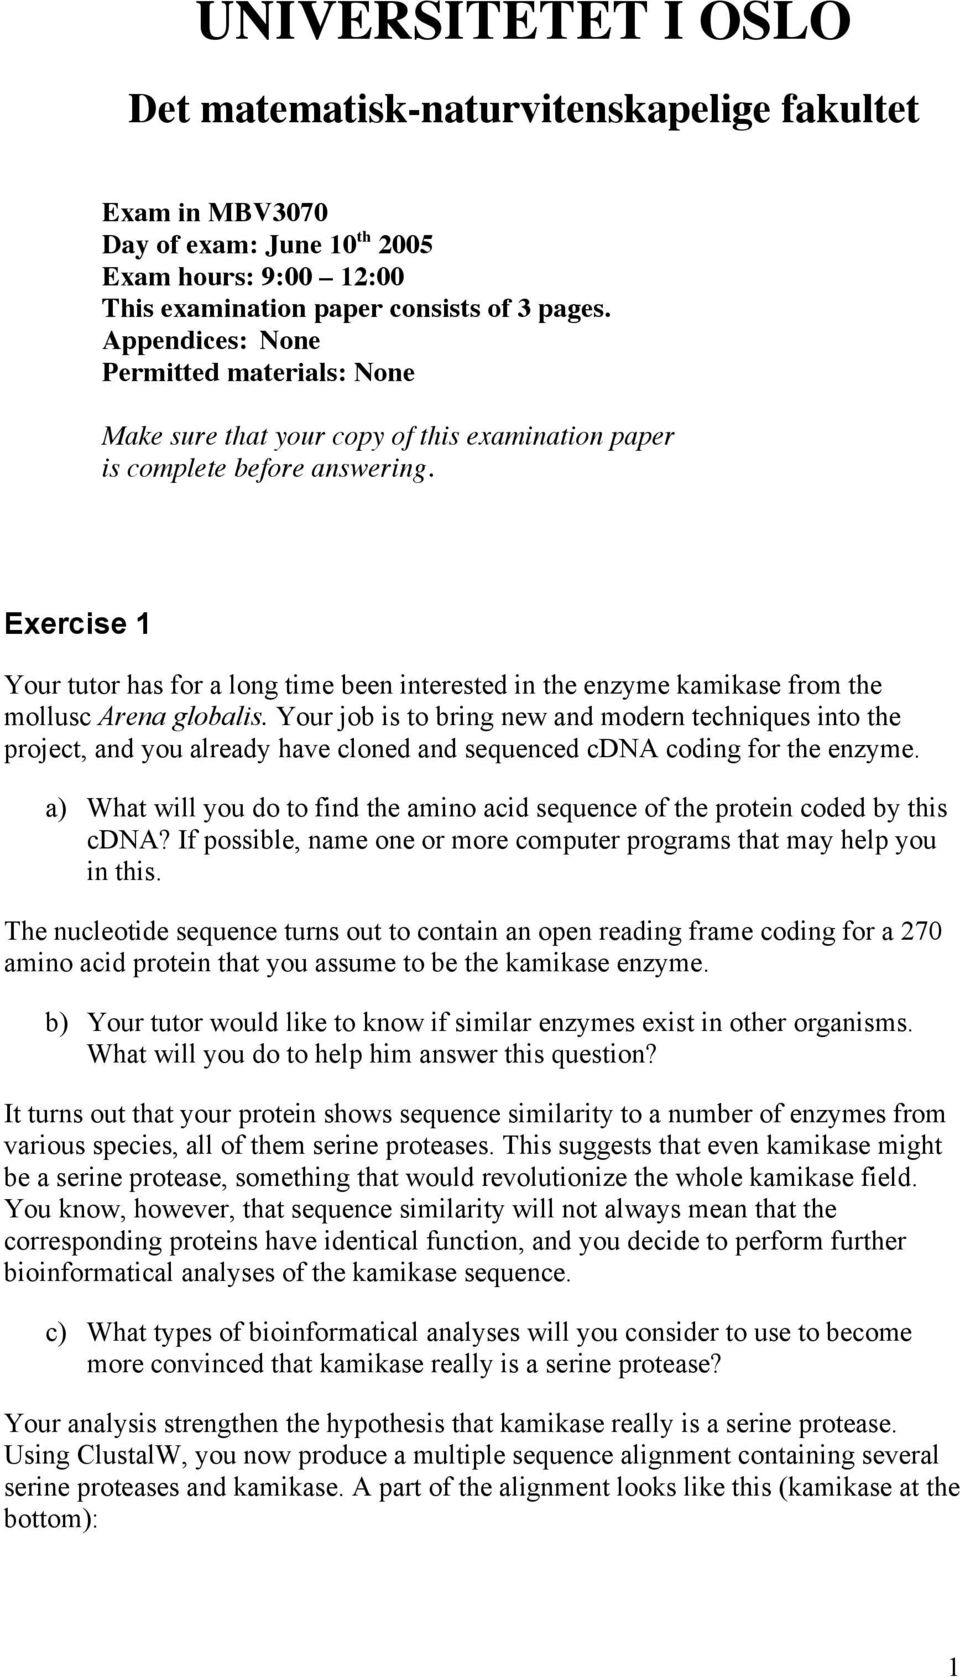 Exercise 1 Your tutor has for a long time been interested in the enzyme kamikase from the mollusc Arena globalis.